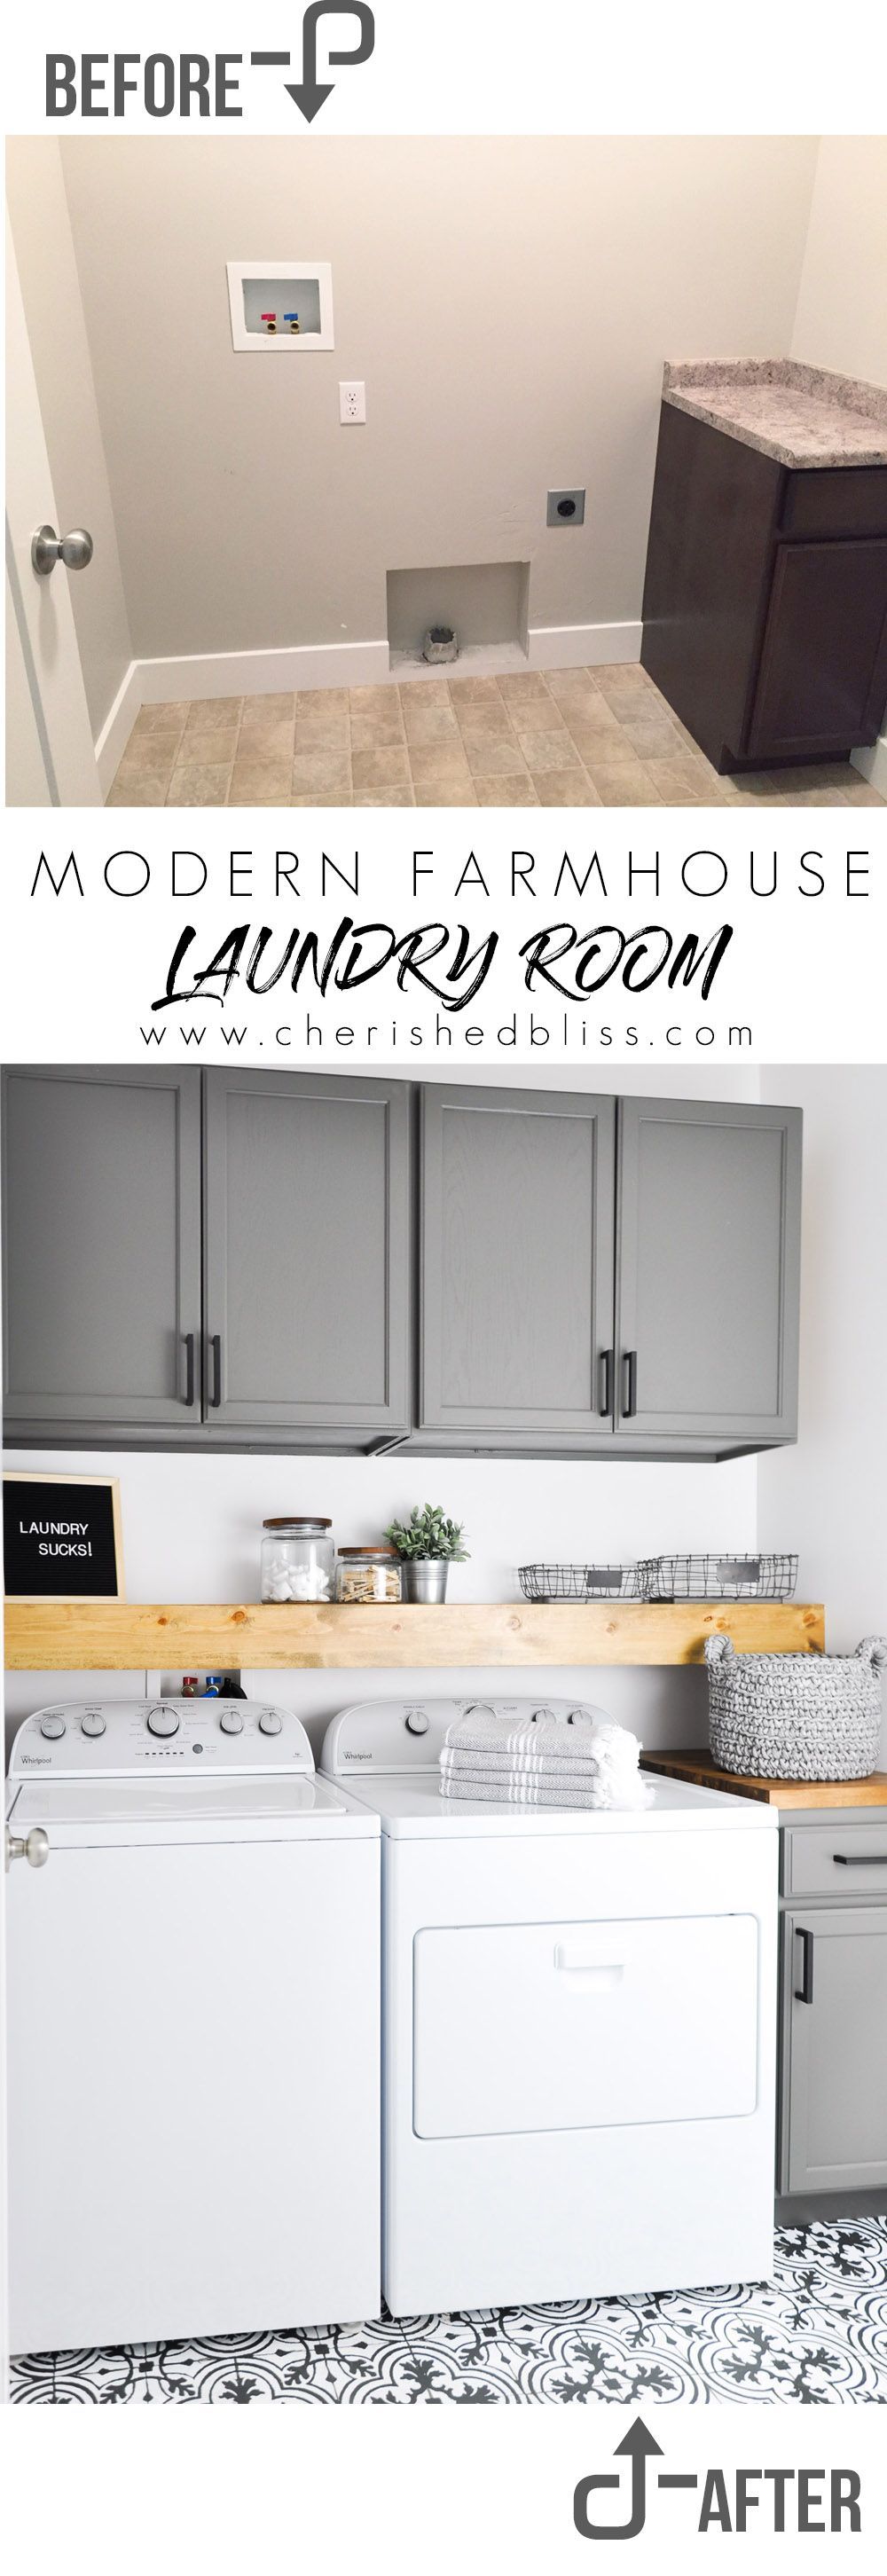 Do laundry in style in this Modern Farmhouse Laundry Room. Come see the transformation from builder grade to gorgeous on a low